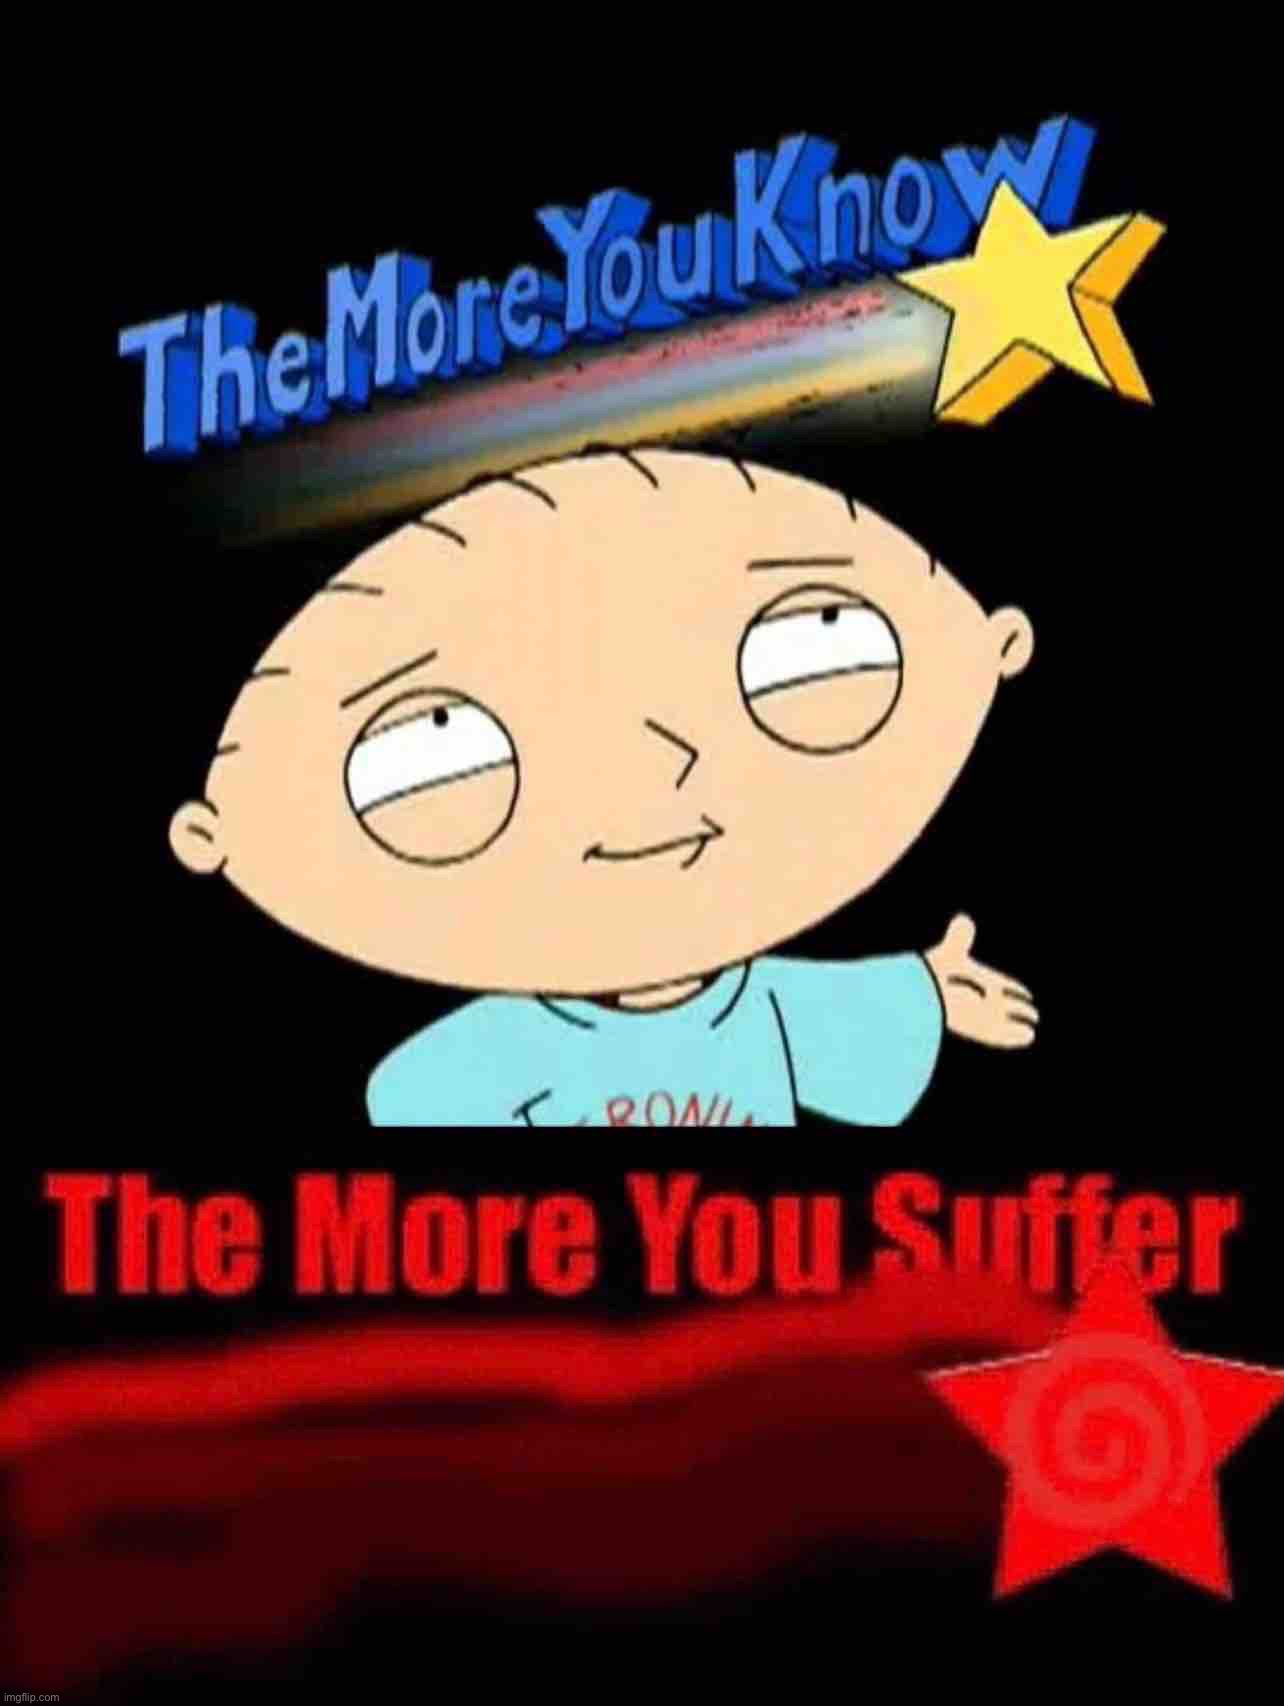 Oof | image tagged in the more you know stewie,the more you suffer,stewie griffin,stewie,dark humor,oof | made w/ Imgflip meme maker